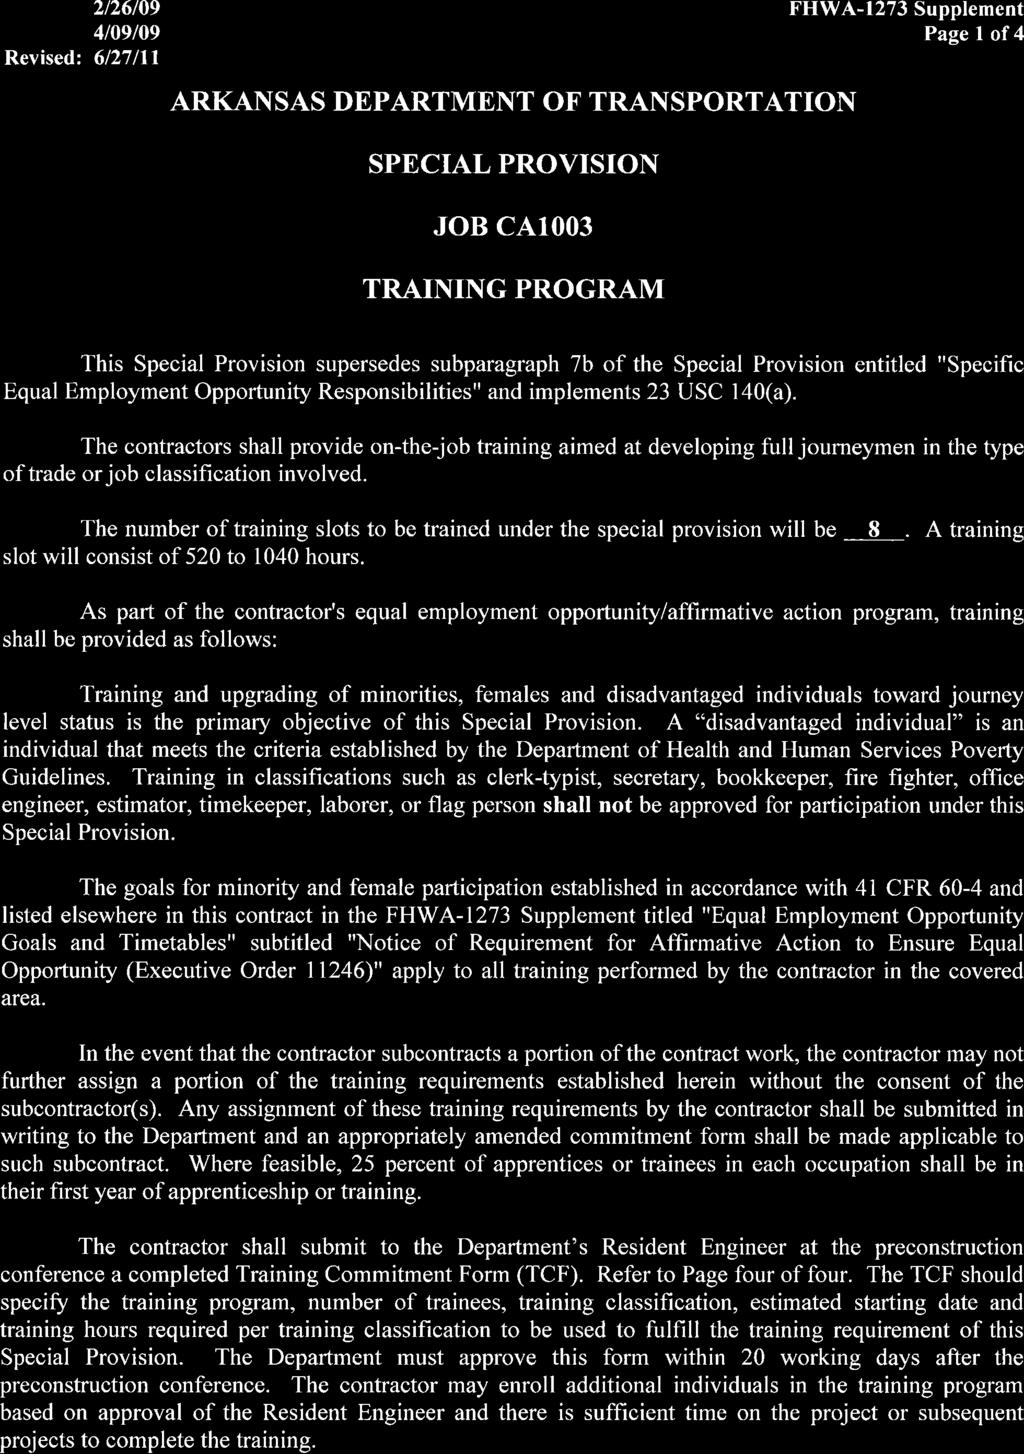 2/26/09 4t09t09 Revised:6127lll SPECIAL PROVISION JOB CA1OO3 TRAINING PROGRAM FHWA-f273 Supplement Page I of4 This Special Provision supersedes subparagraph 7b of the Special Provision entitled